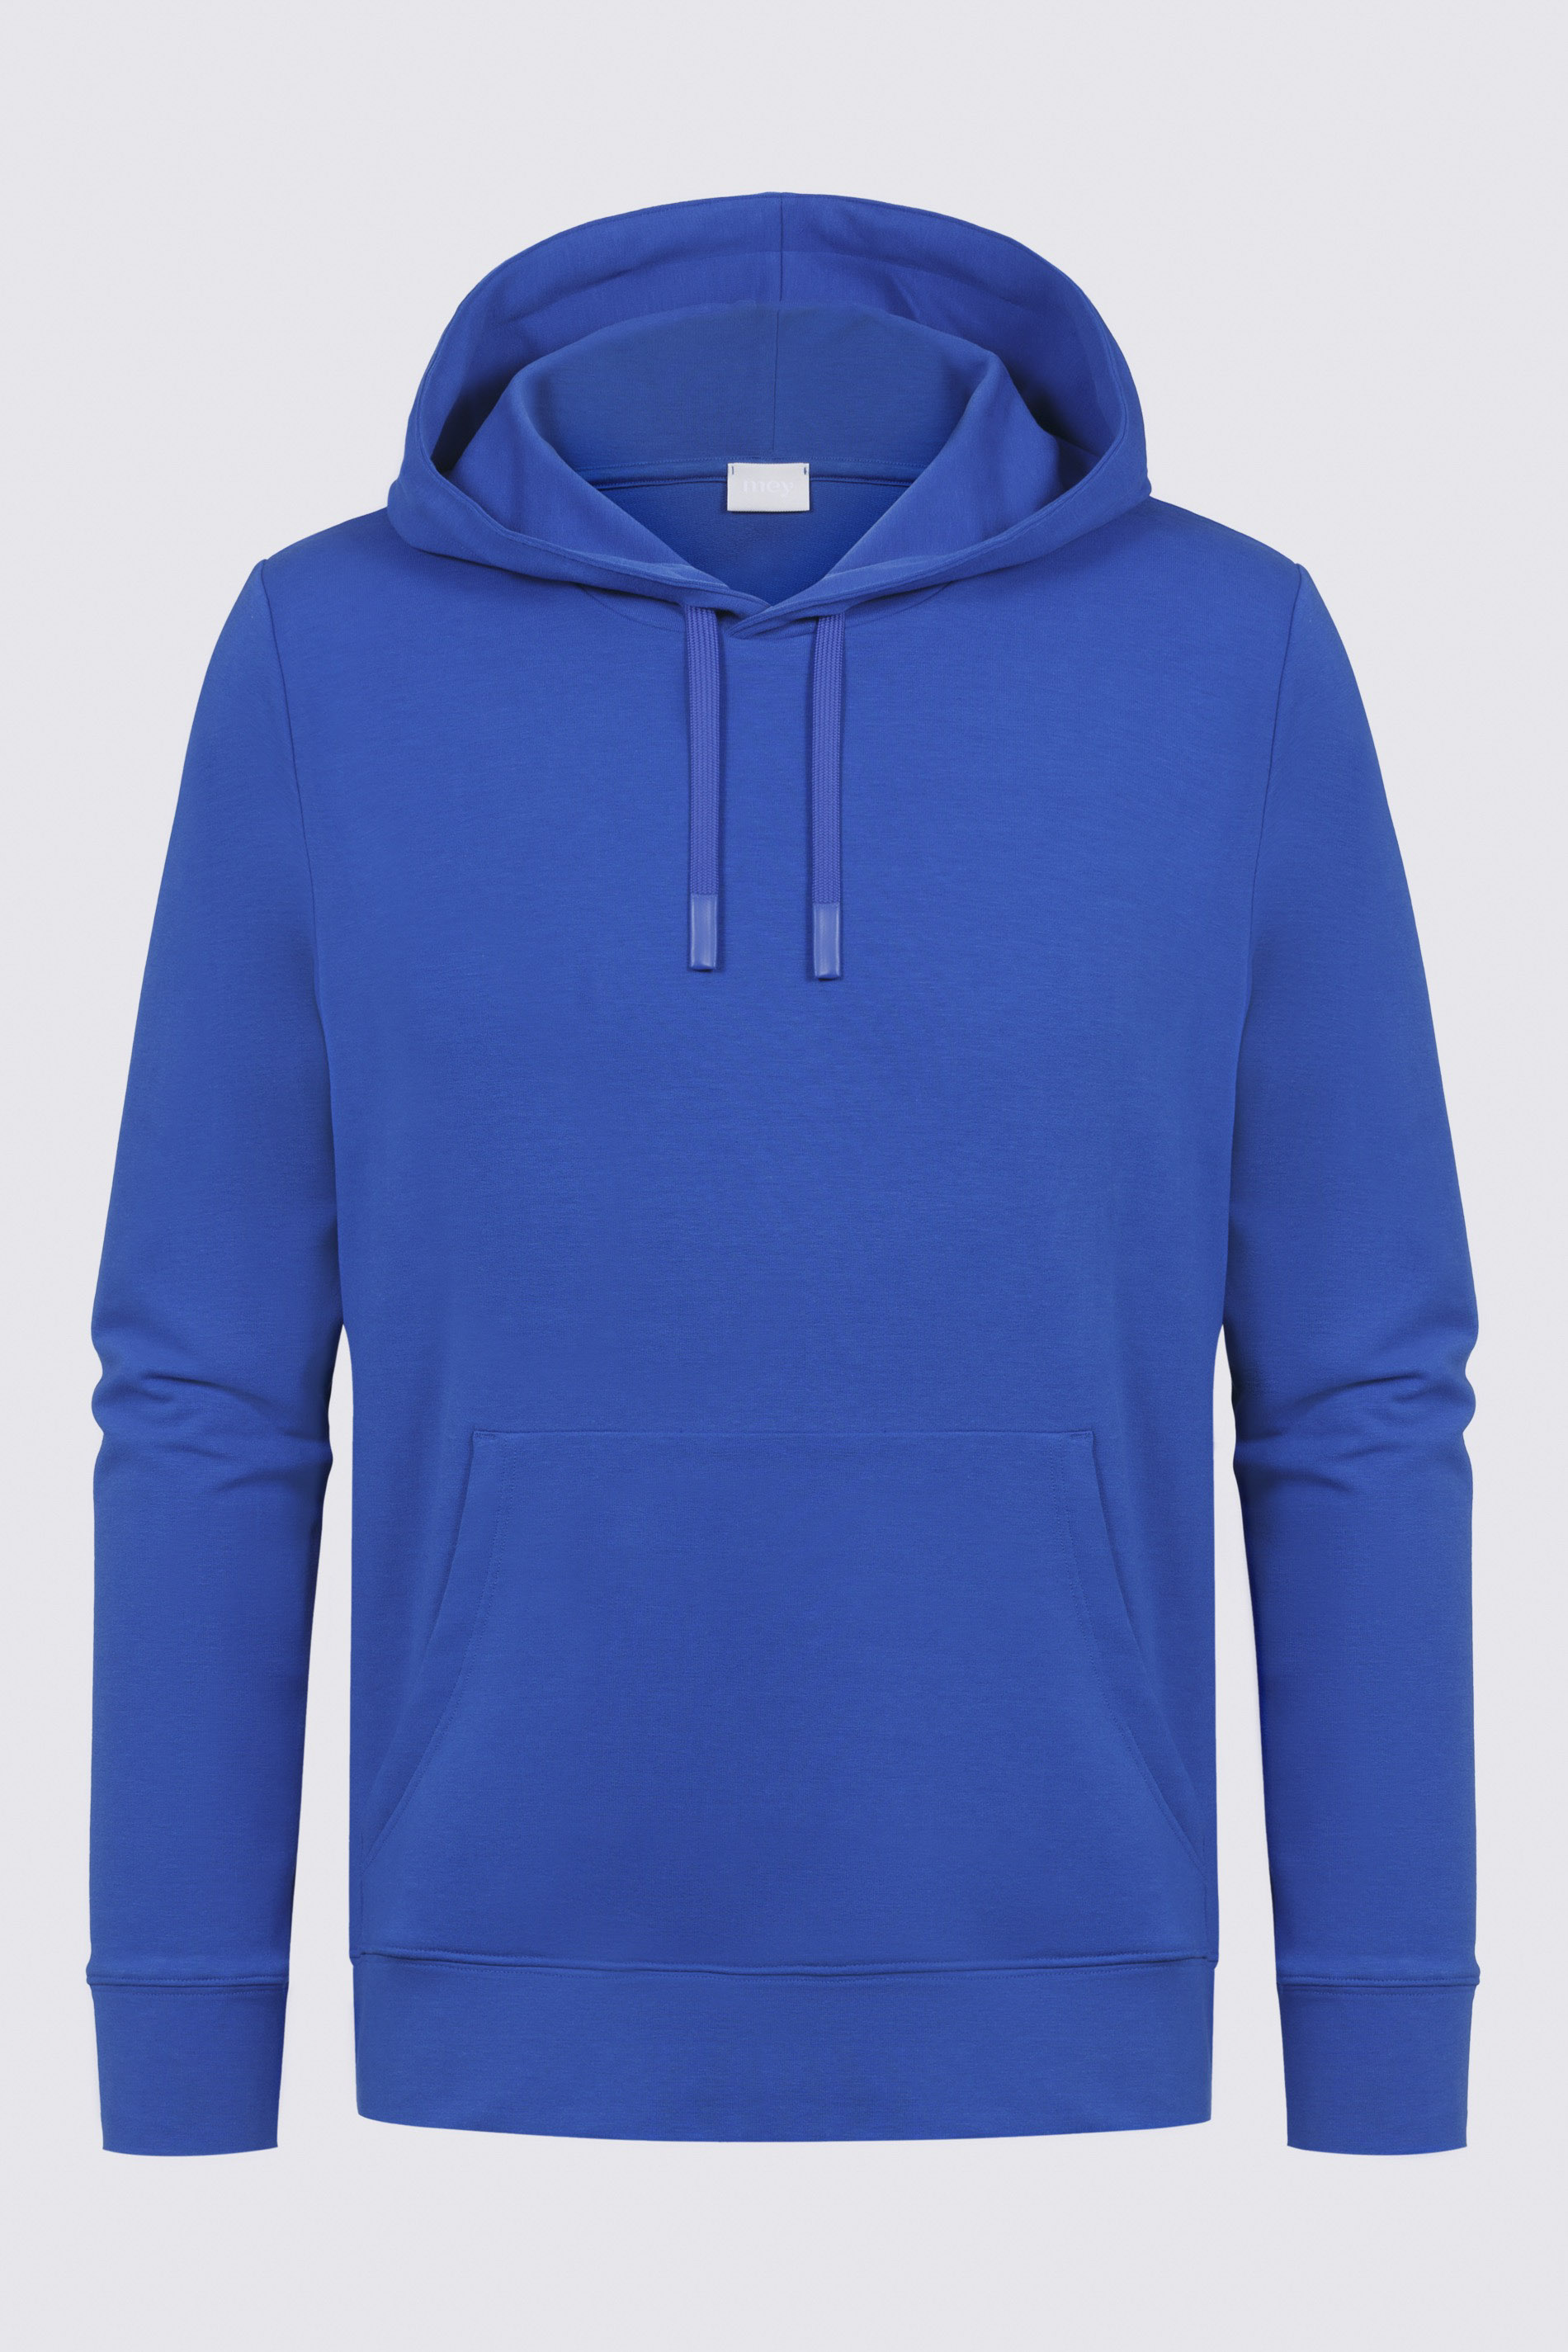 Hoody Serie Enjoy Colour Uitknippen | mey®